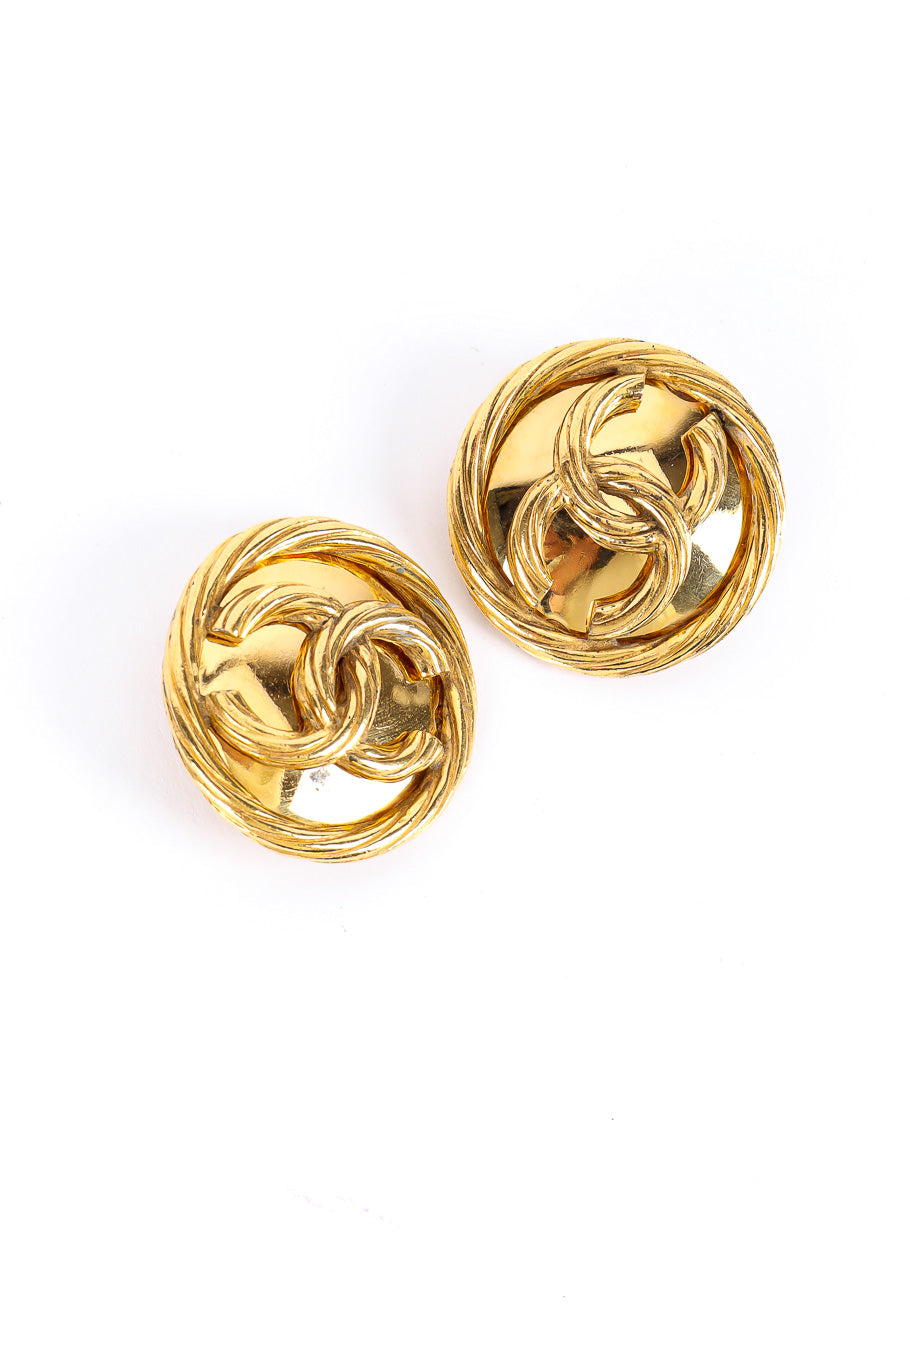 Classic CC monogram rope earrings by Chanel Product Shot @recessla